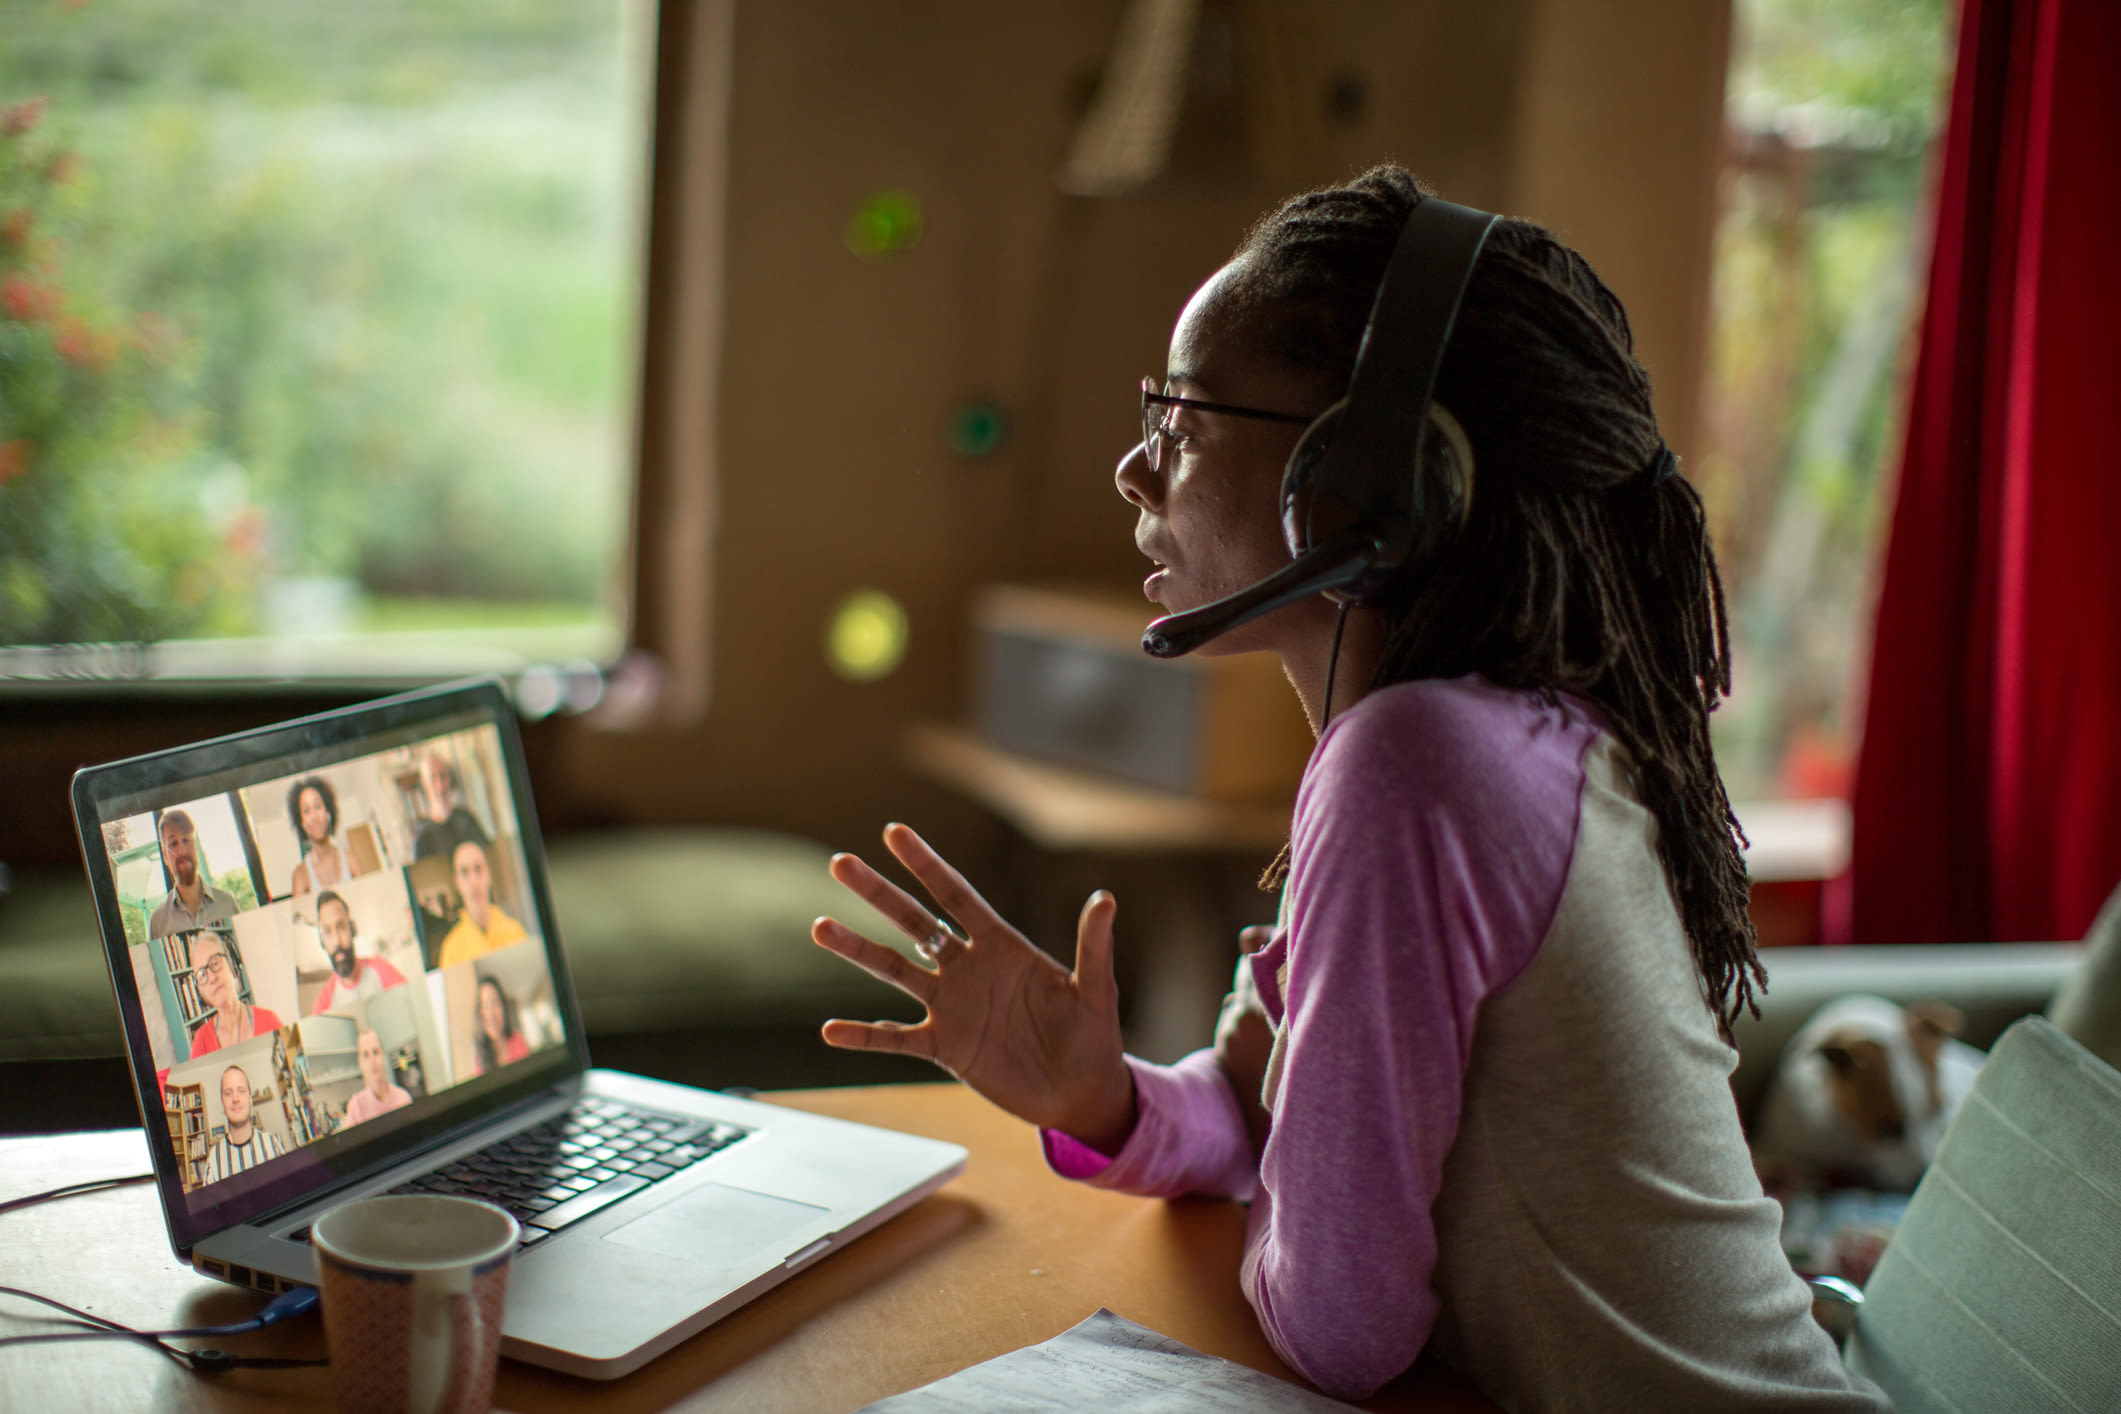 A Black woman wears a headset while on a video call with nine other people on her laptop